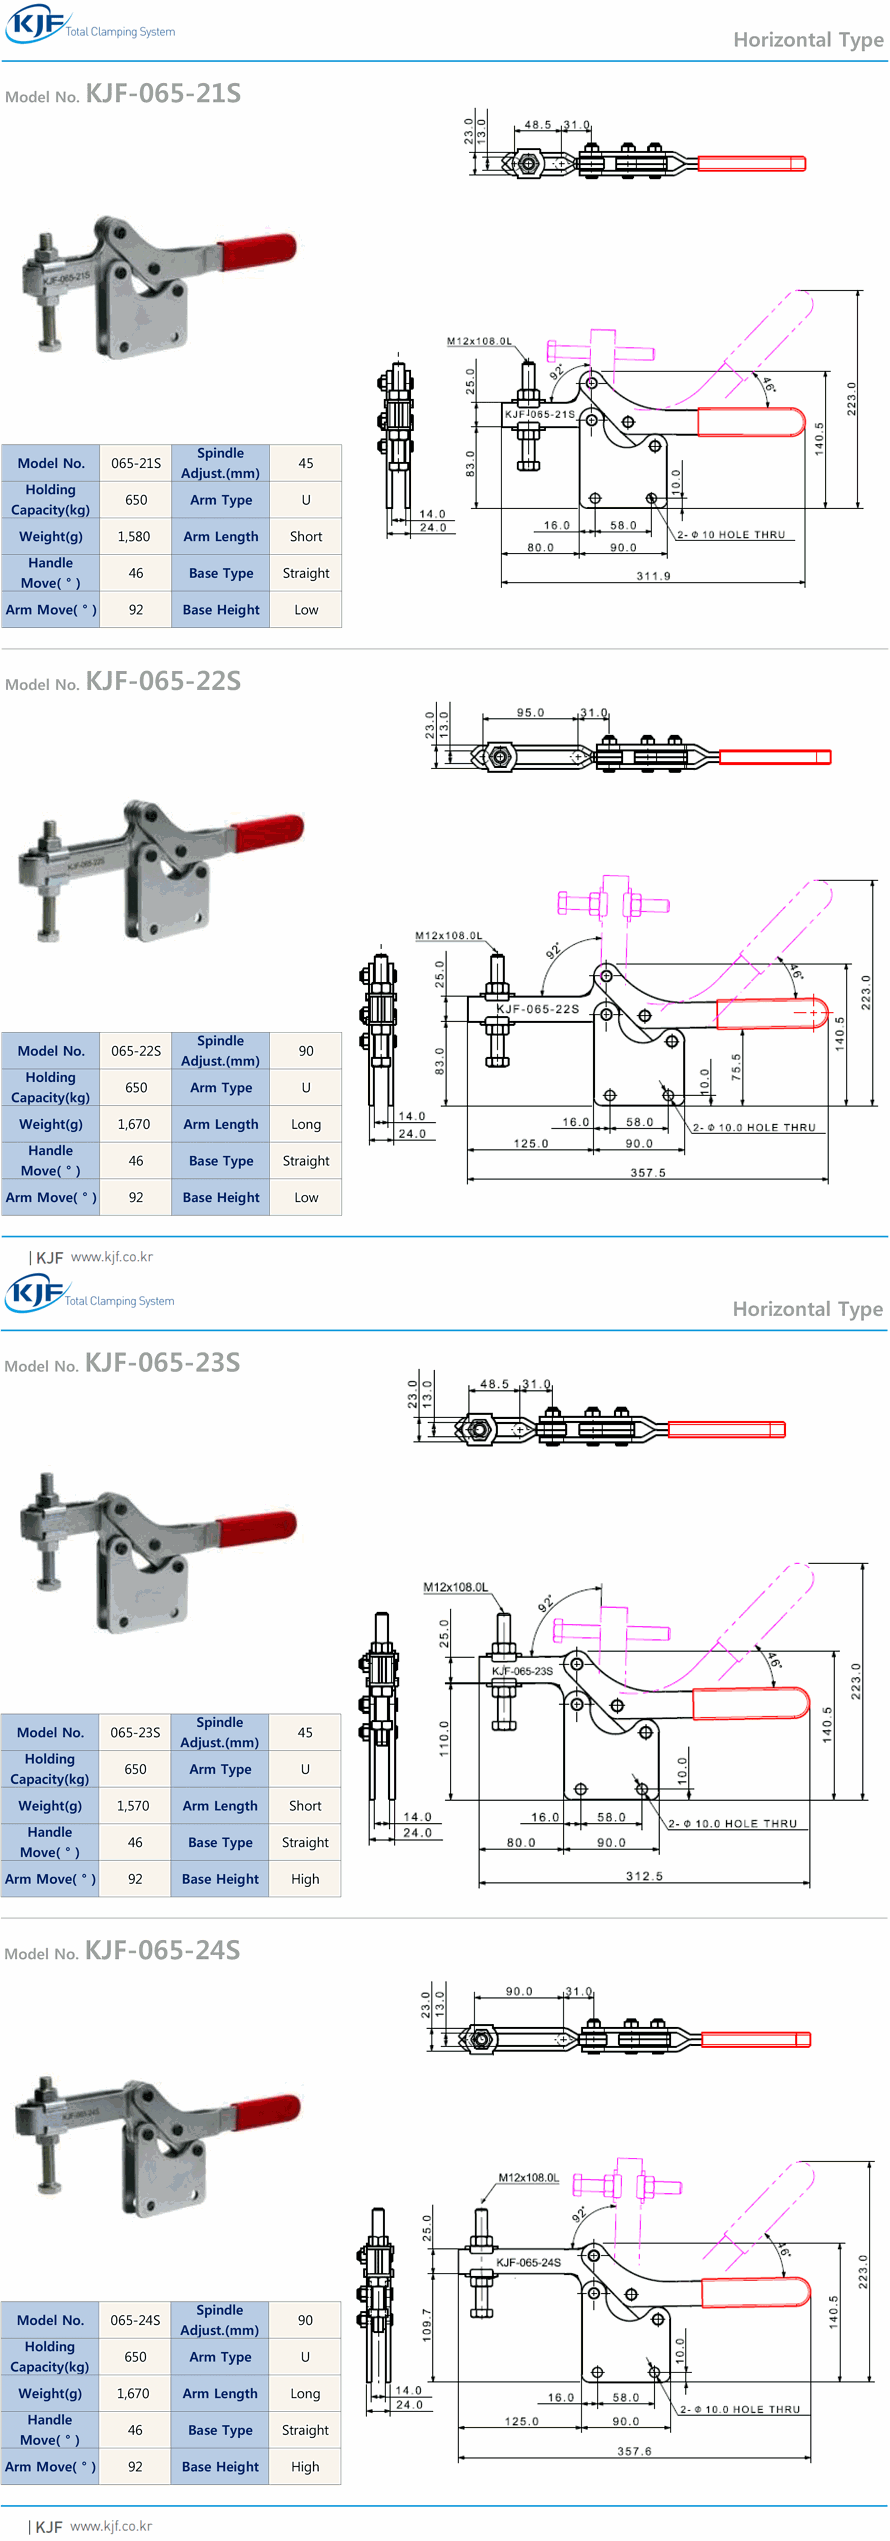 Toggle Clamp - Horizontal Type (KJF-065S): Related Products